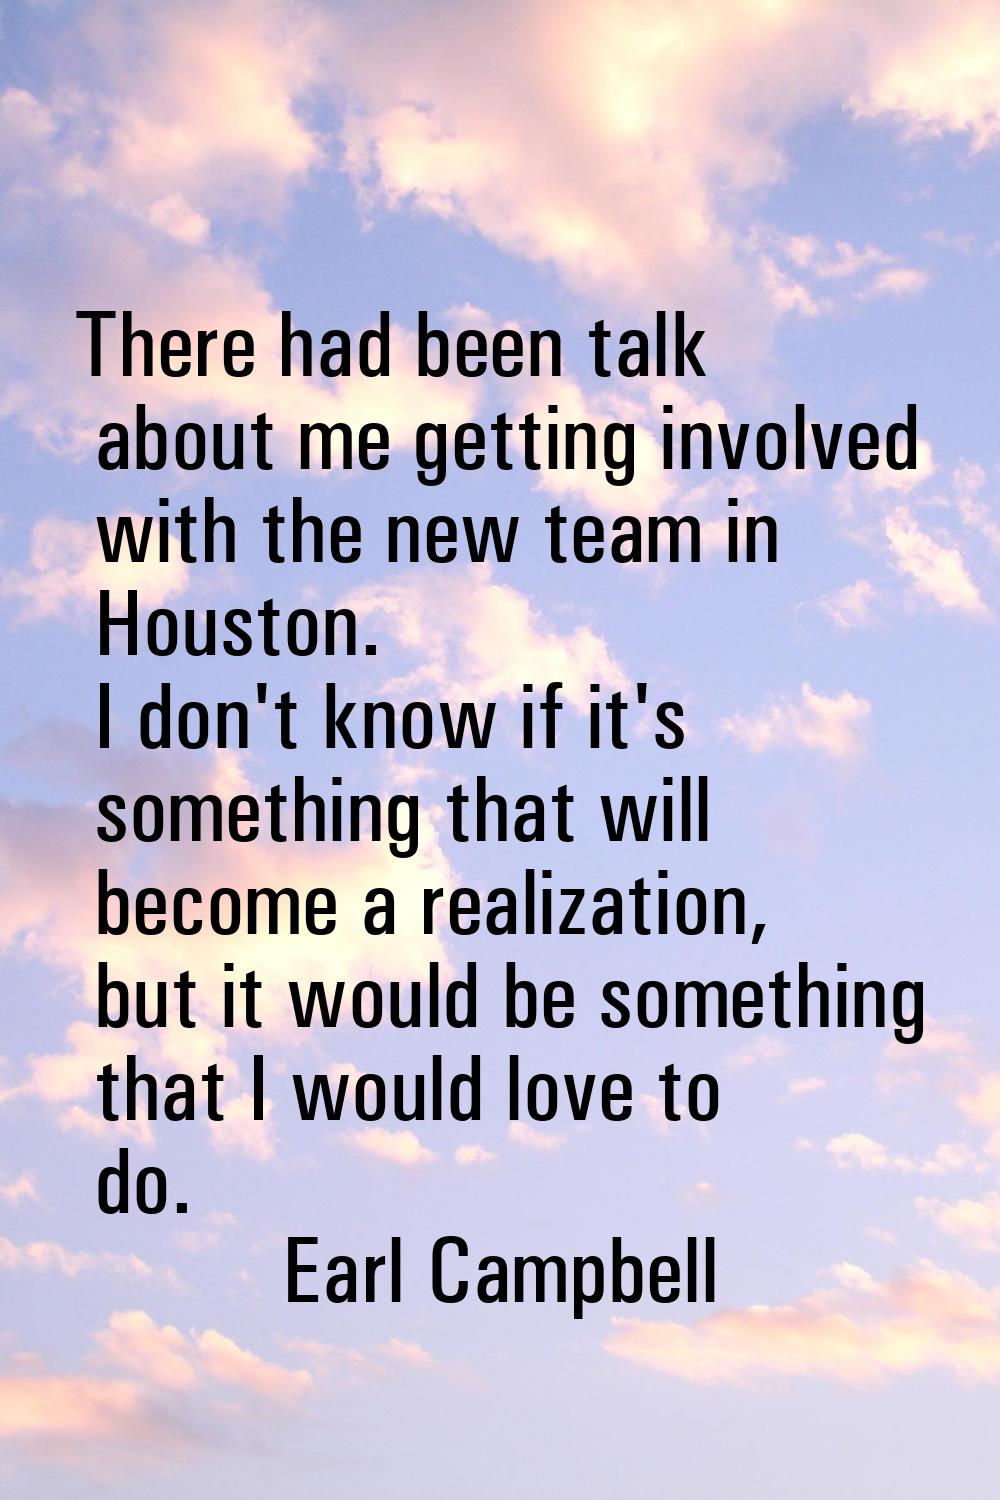 There had been talk about me getting involved with the new team in Houston. I don't know if it's so